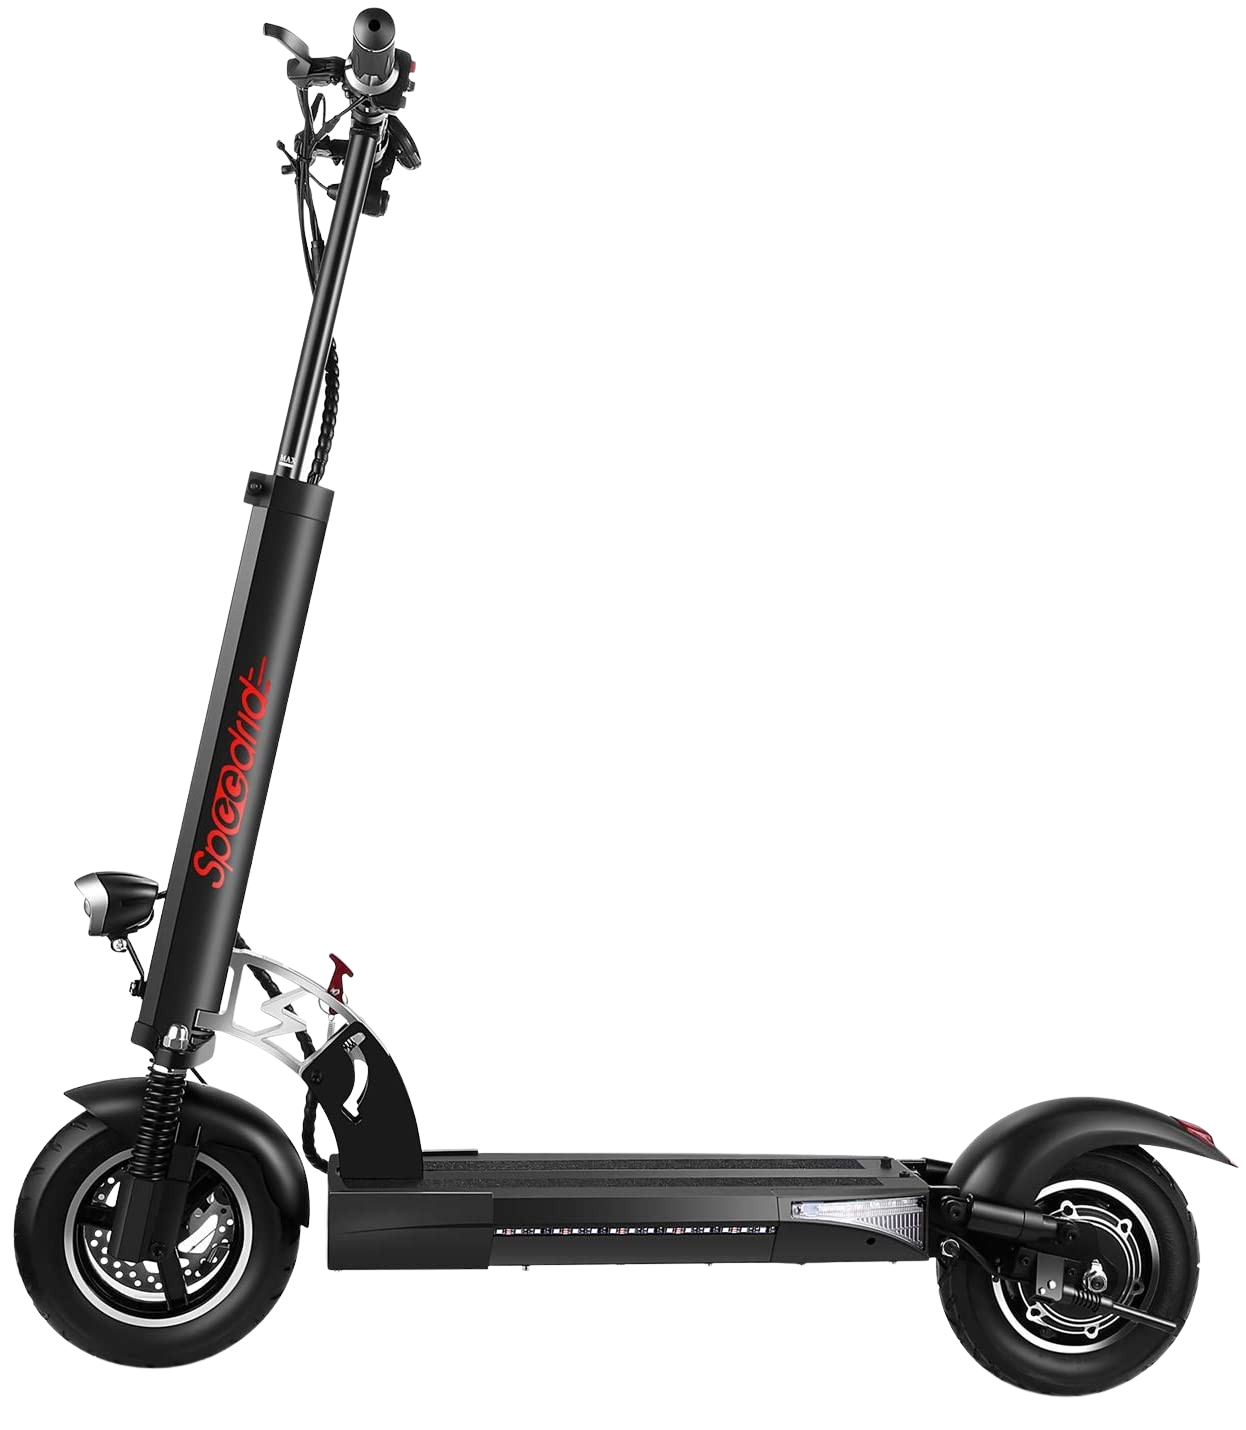 Speedrid, Speedrid S1-MAX Up To 38 Mile Range 18.6 MPH 10" Tires 500W 36V Electric Scooter New